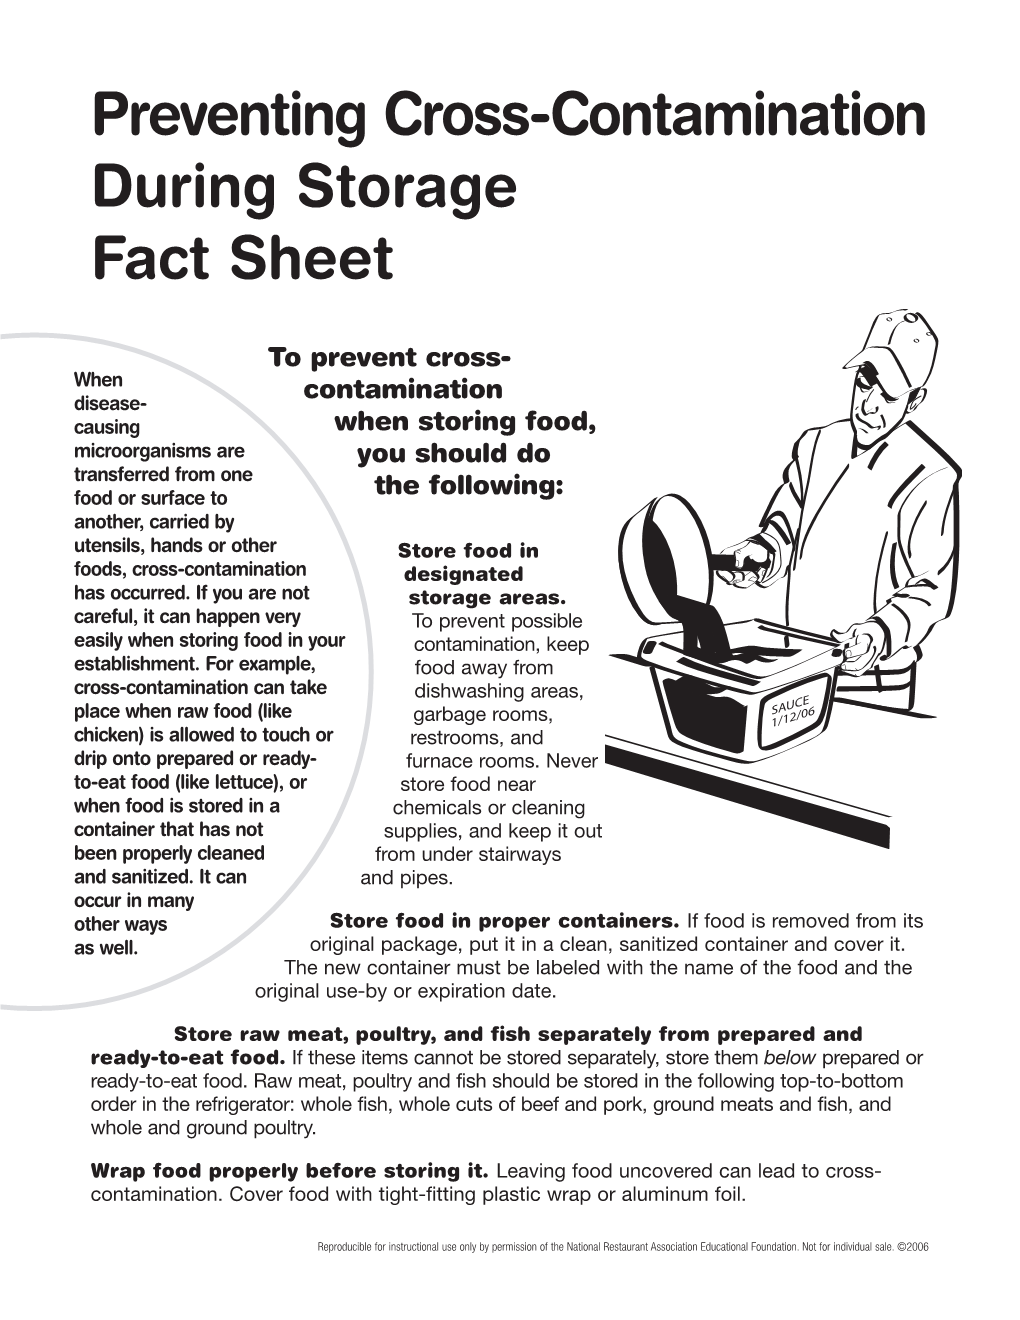 Preventing Cross-Contamination During Storage Fact Sheet